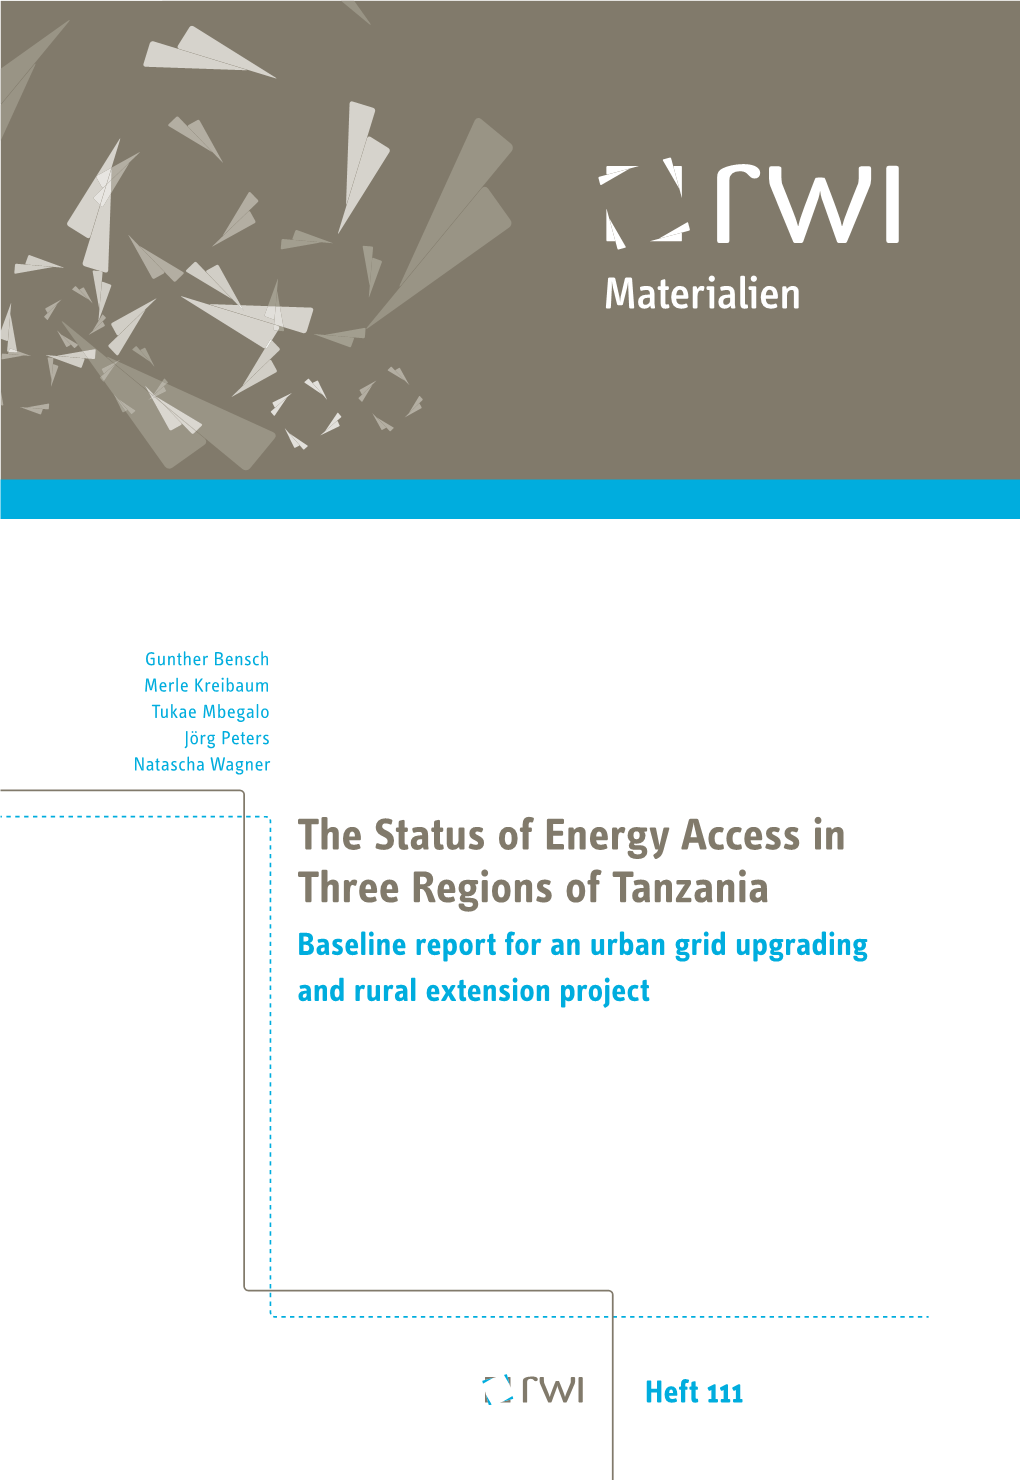 The Status of Energy Access in Three Regions of Tanzania Baseline Report for an Urban Grid Upgrading and Rural Extension Project